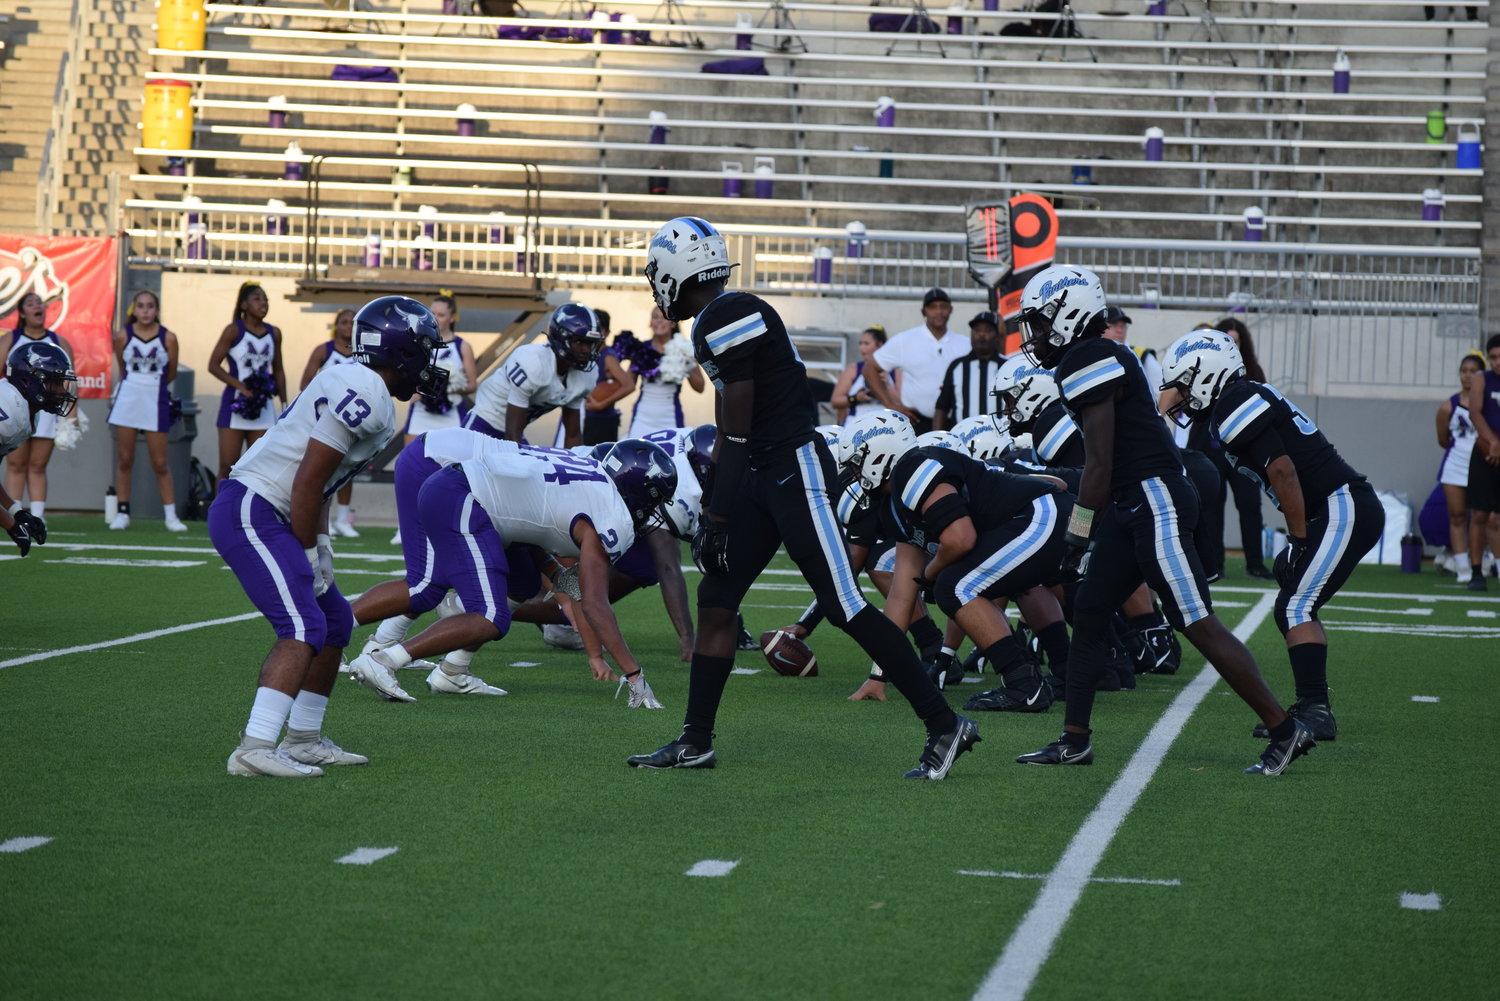 Paetow lines up to run a play against Morton Ranch during a game on Friday at Legacy Stadium.